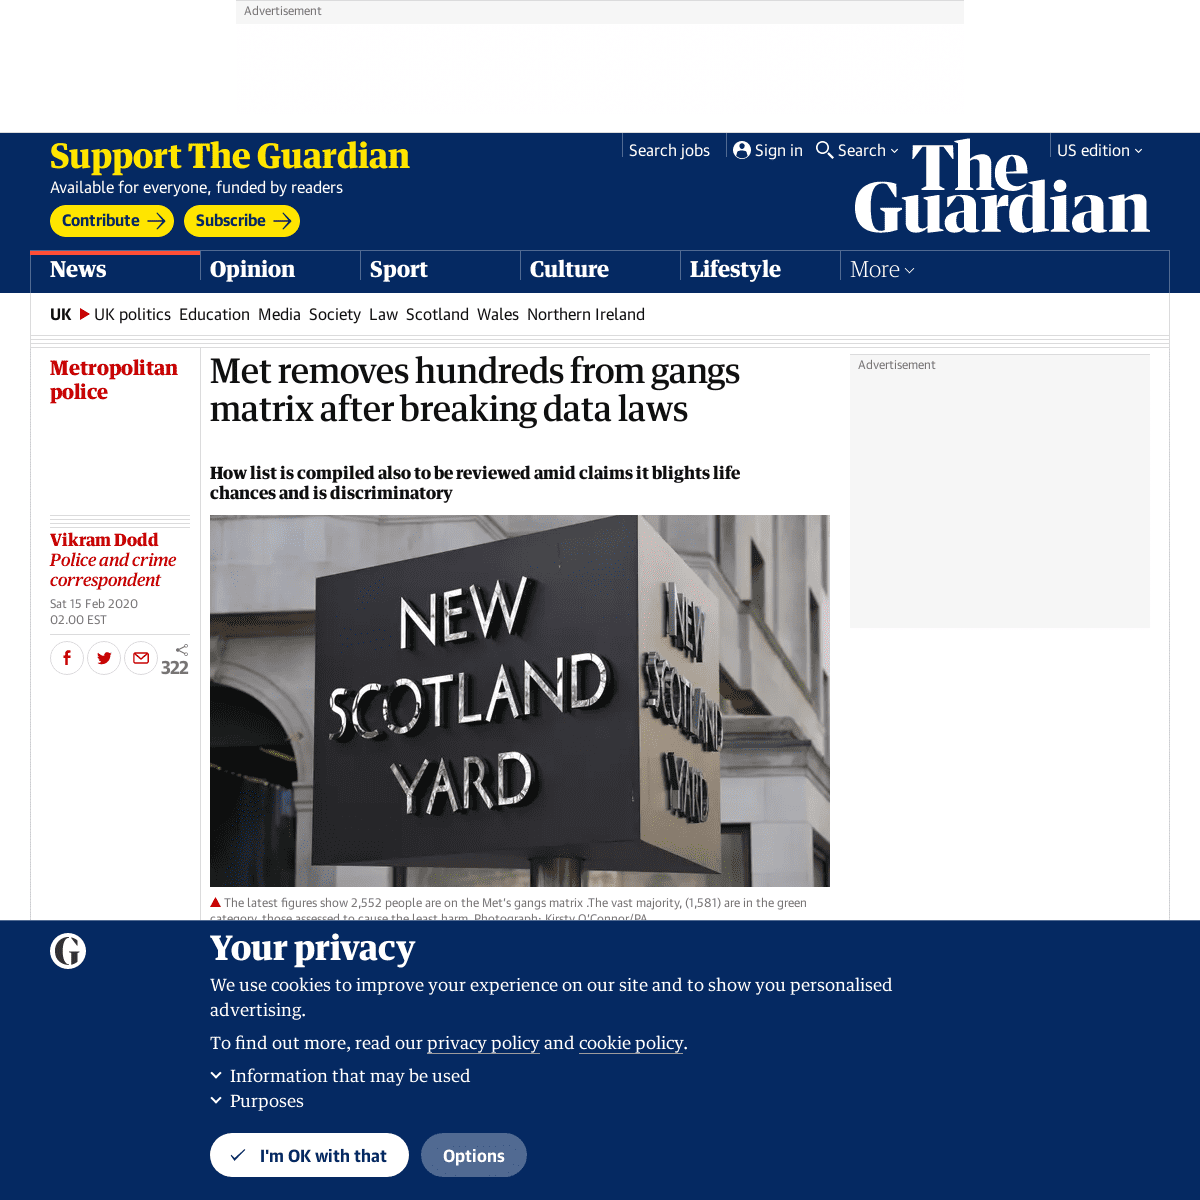 A complete backup of www.theguardian.com/uk-news/2020/feb/15/met-removes-hundreds-from-gangs-matrix-after-breaking-data-laws